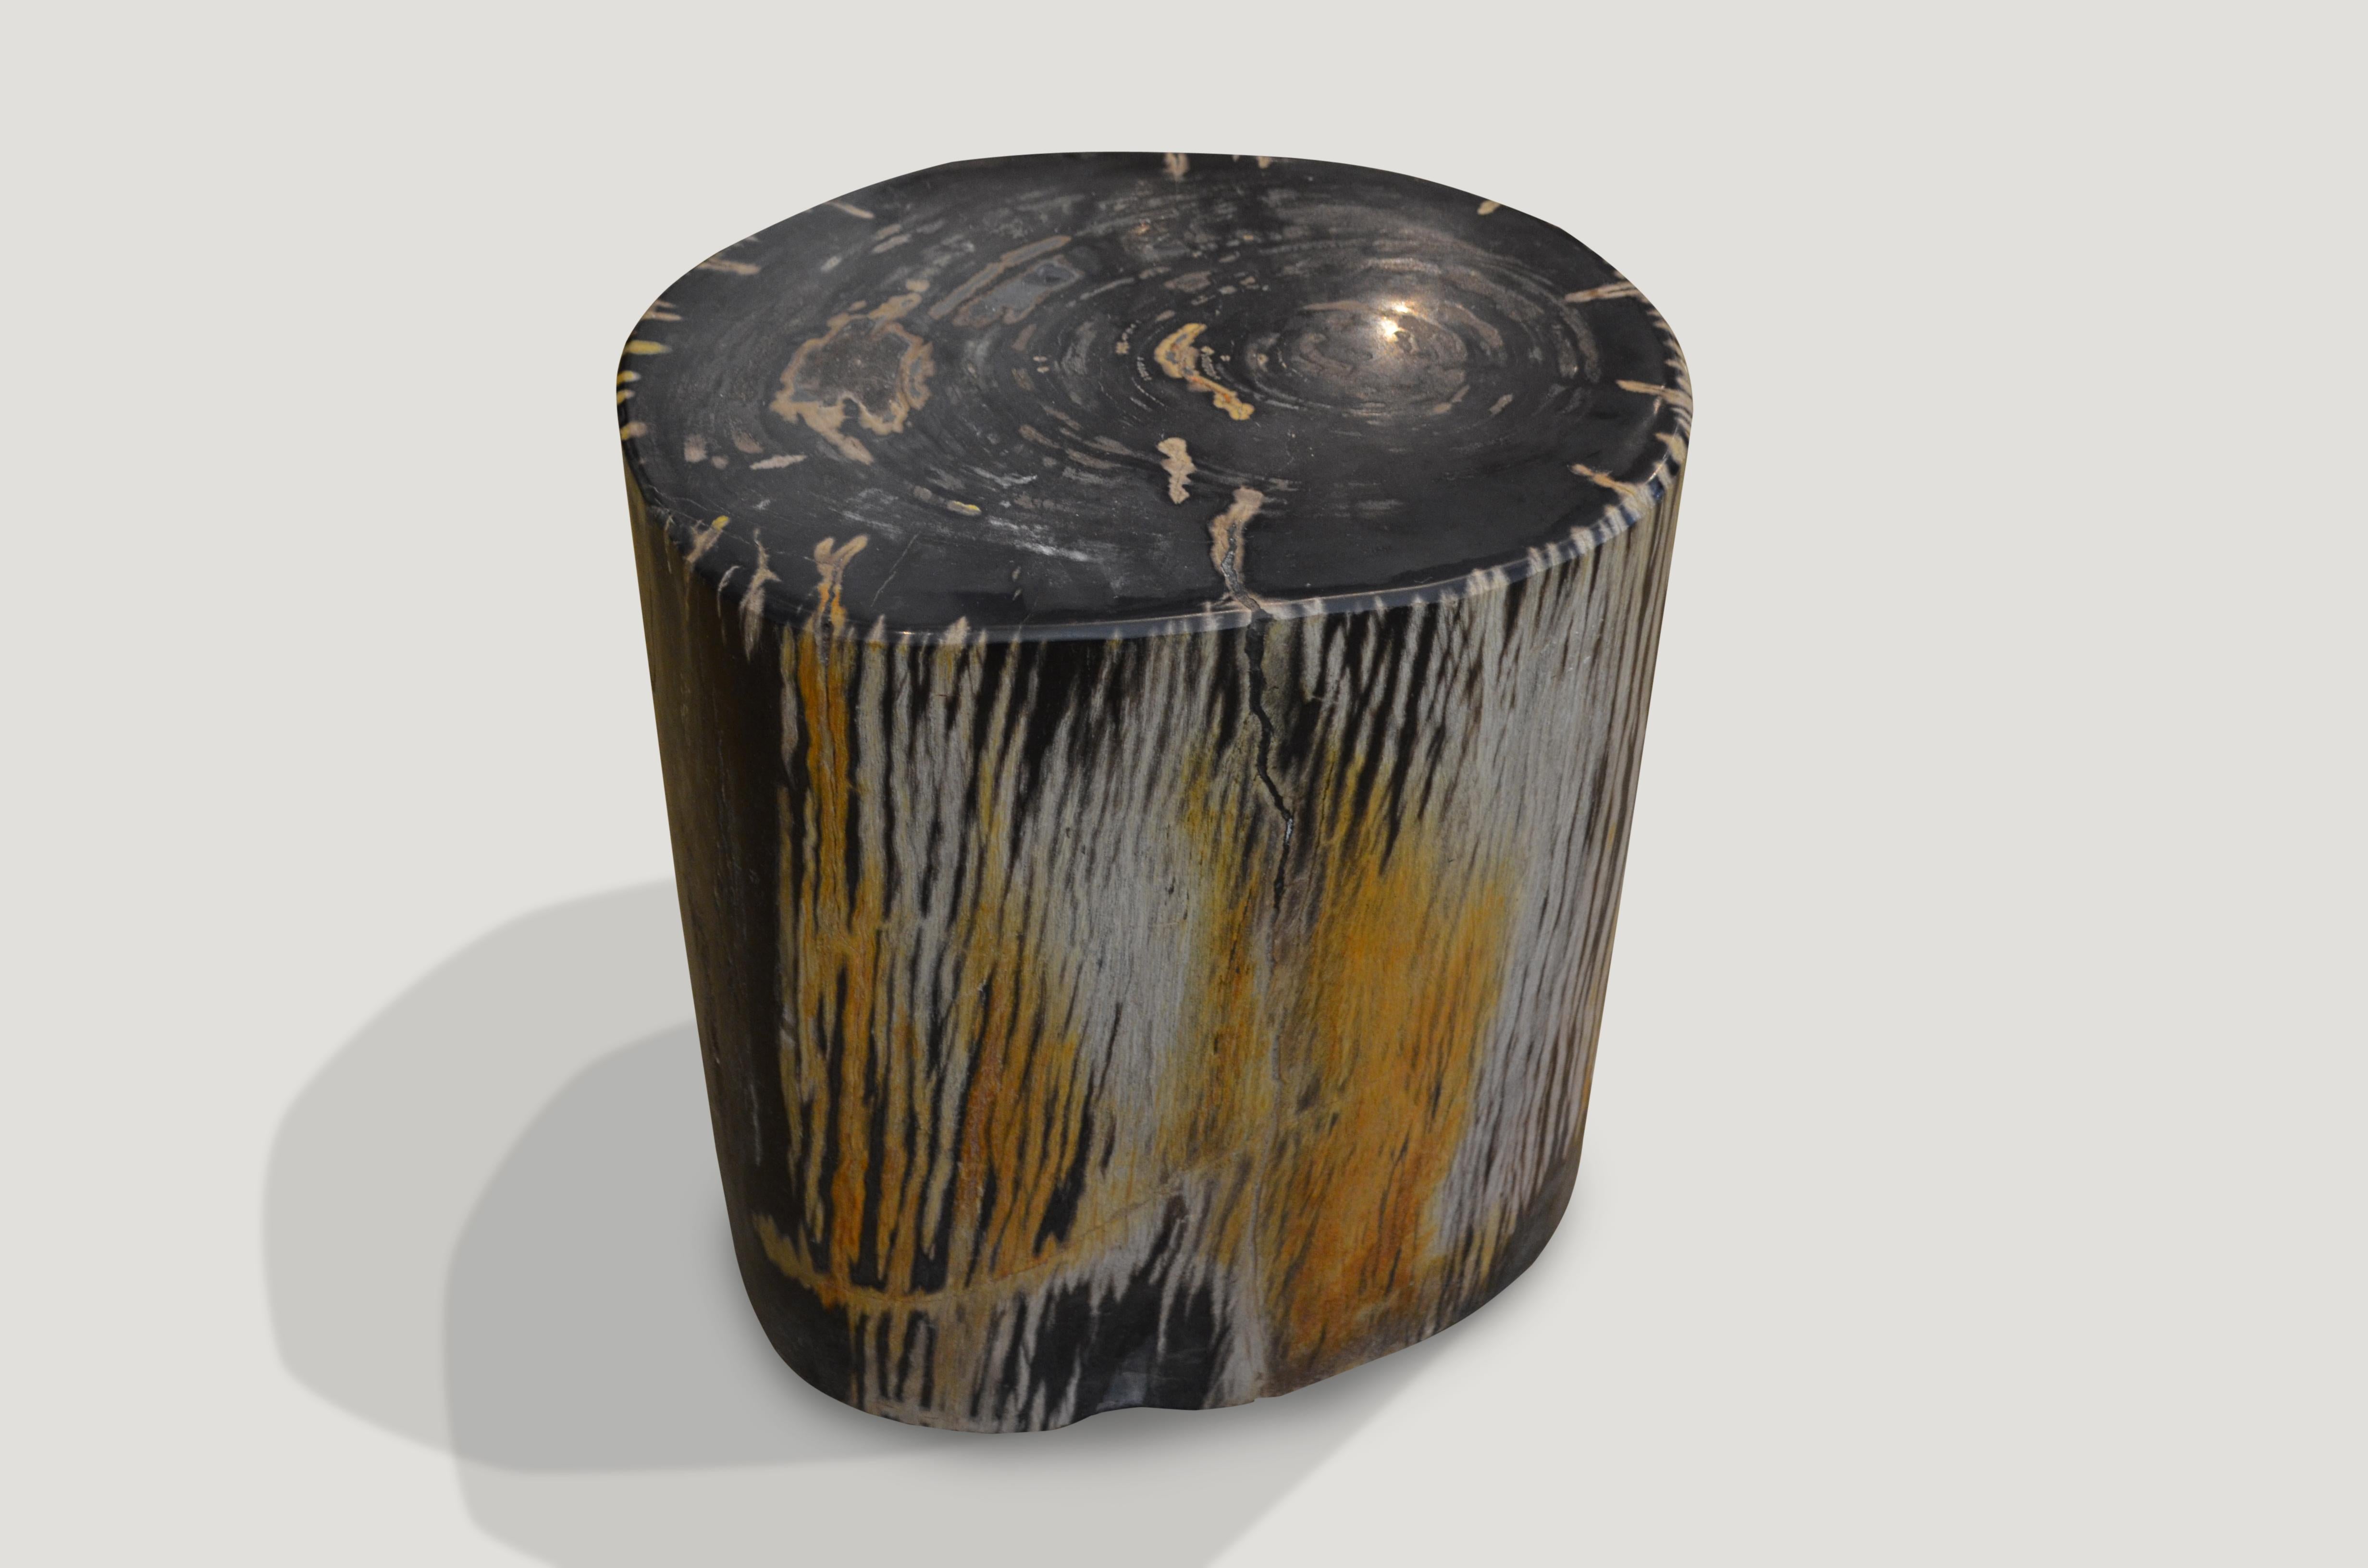 Stunning contrasting tones with a zebra effect. We have a collection of four all cut from the same log, in different sizes.

We source the highest quality petrified wood available. Each piece is hand-selected and highly polished with minimal